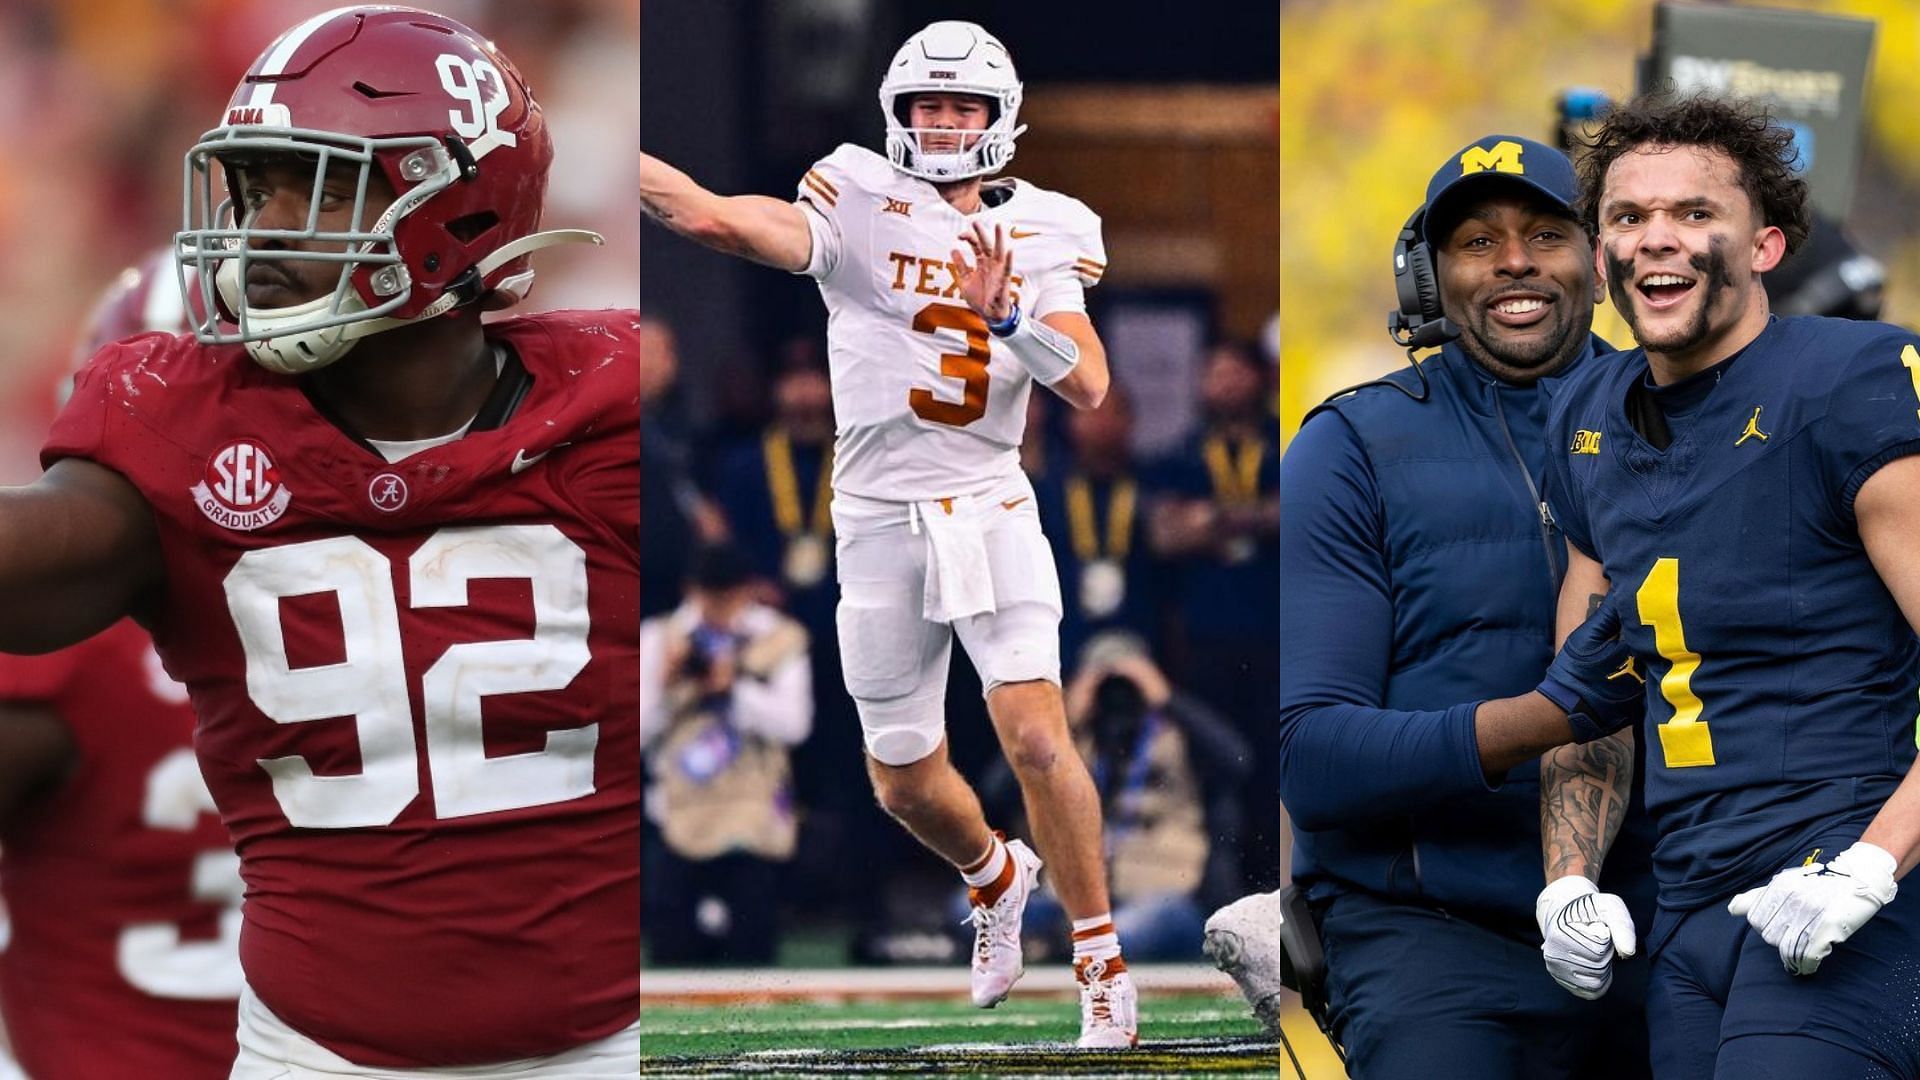 The College Football Playoff rankings are finalized